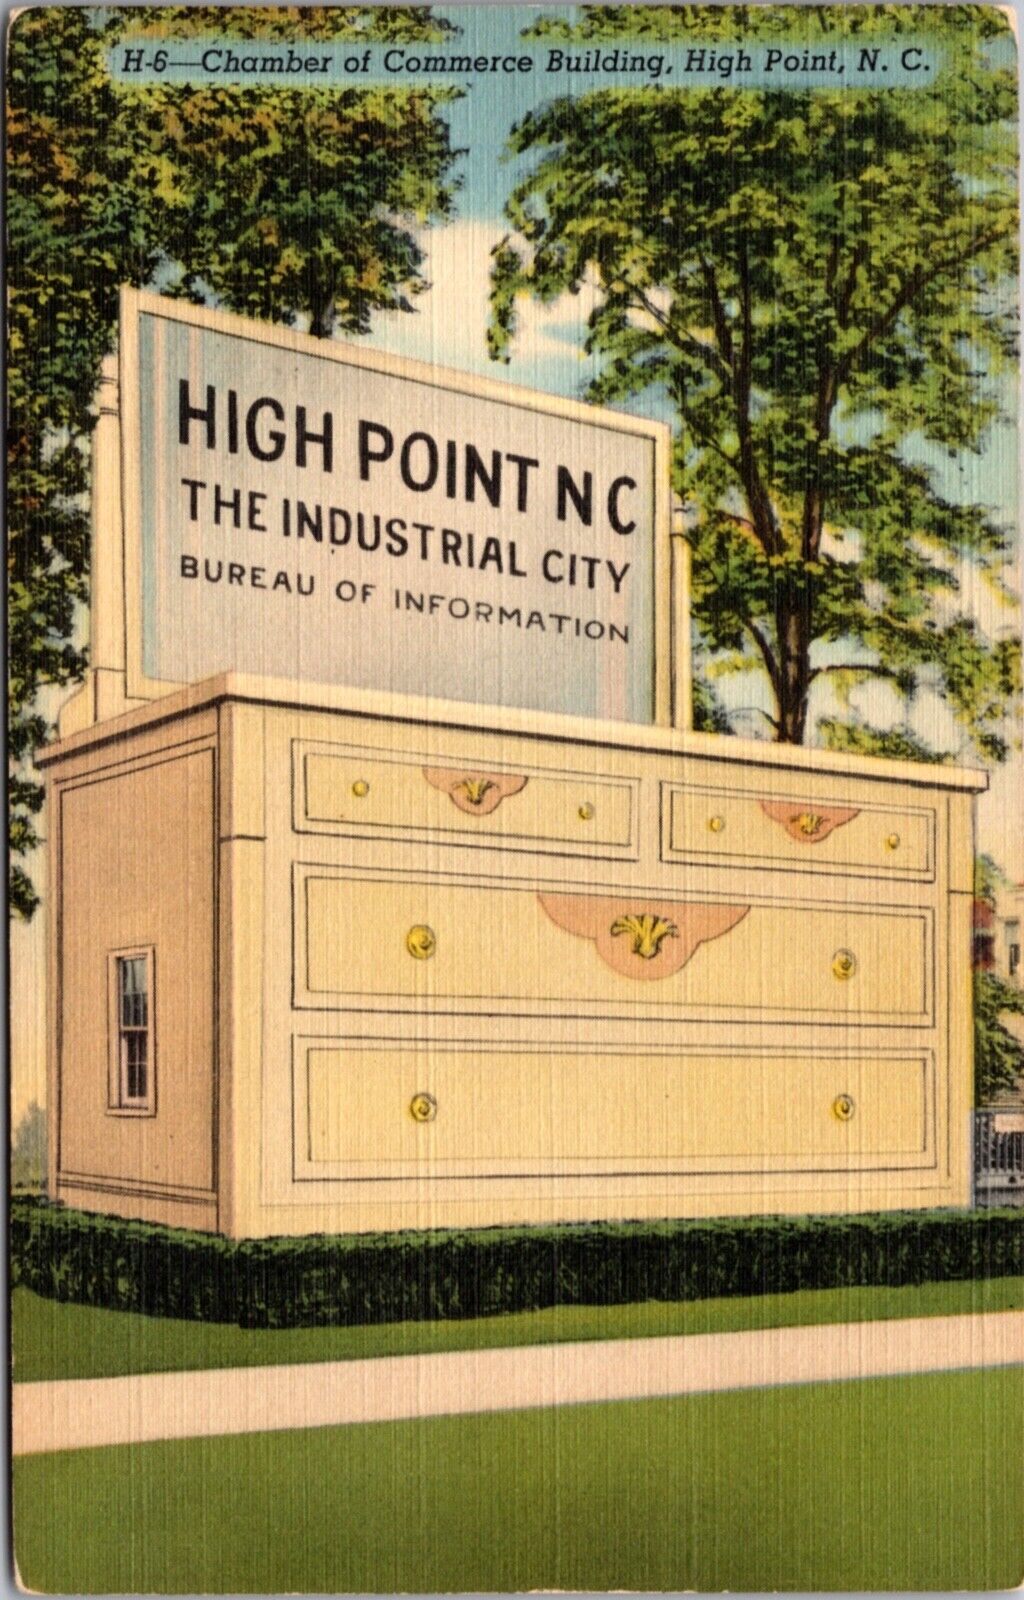 Linen PC Dresser Shaped Chamber of Commerce Building High Point, North Carolina